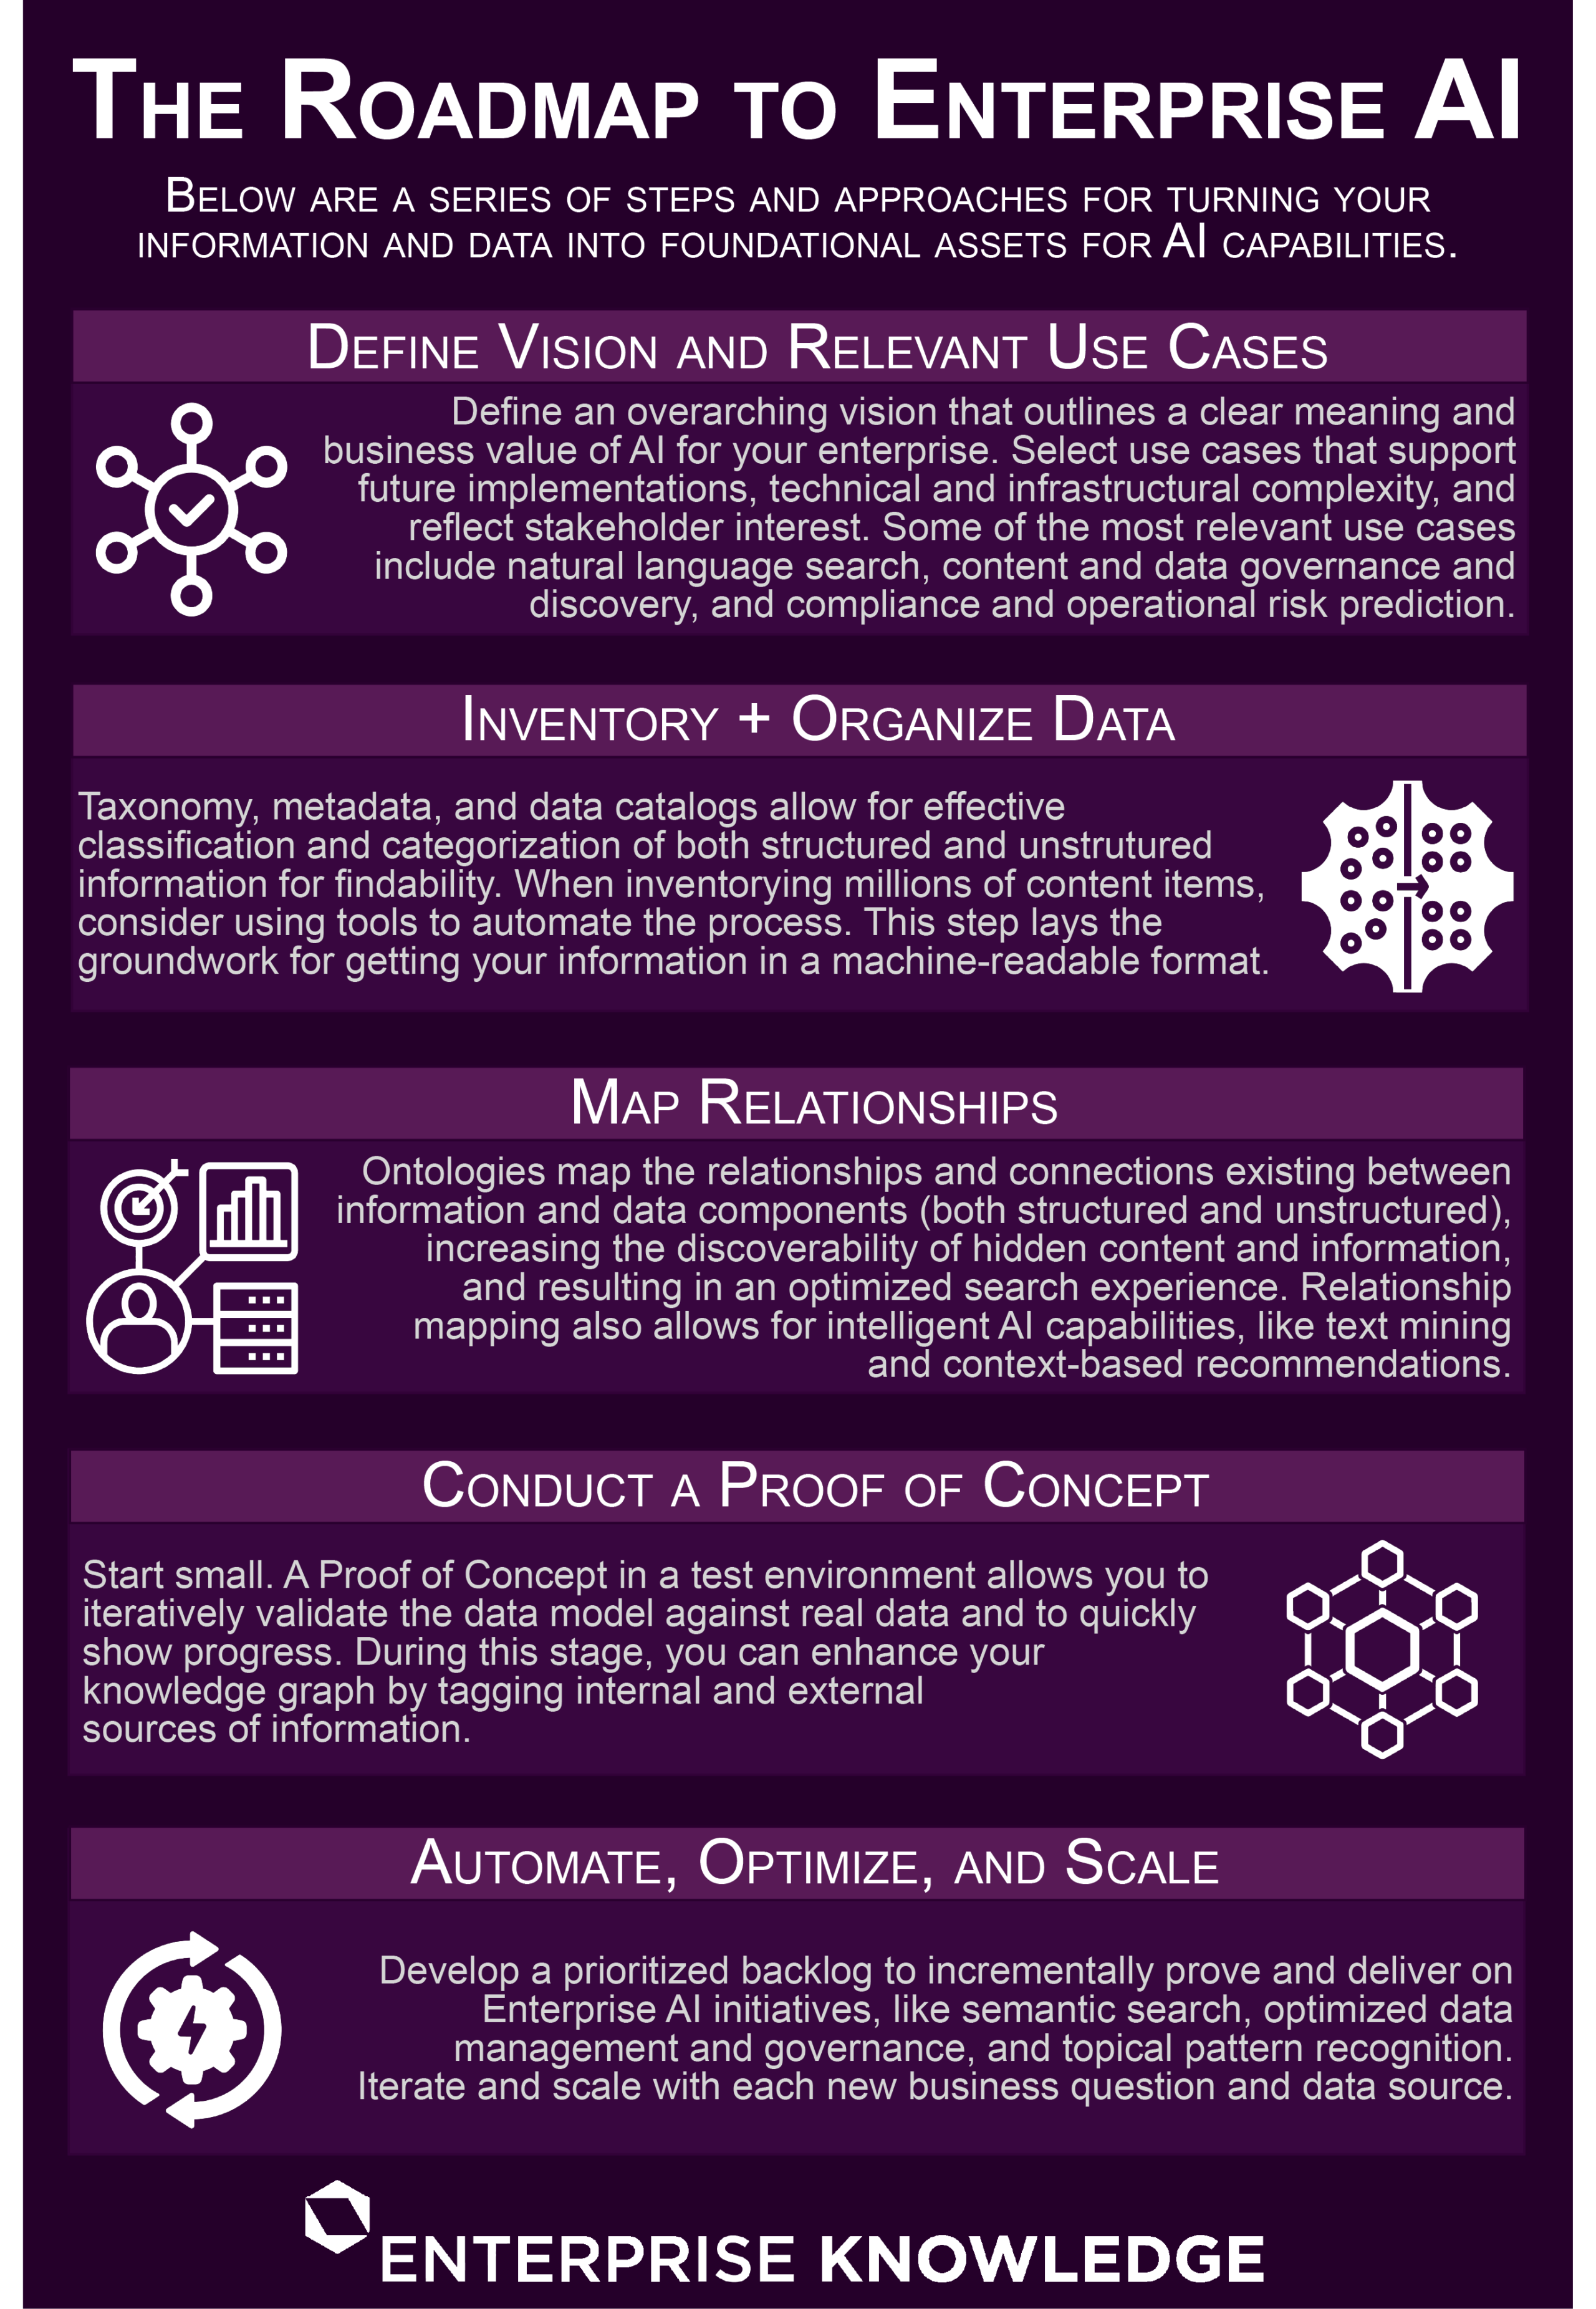 An infographic about implementing AI (artificial intelligence) capabilities into your enterprise.